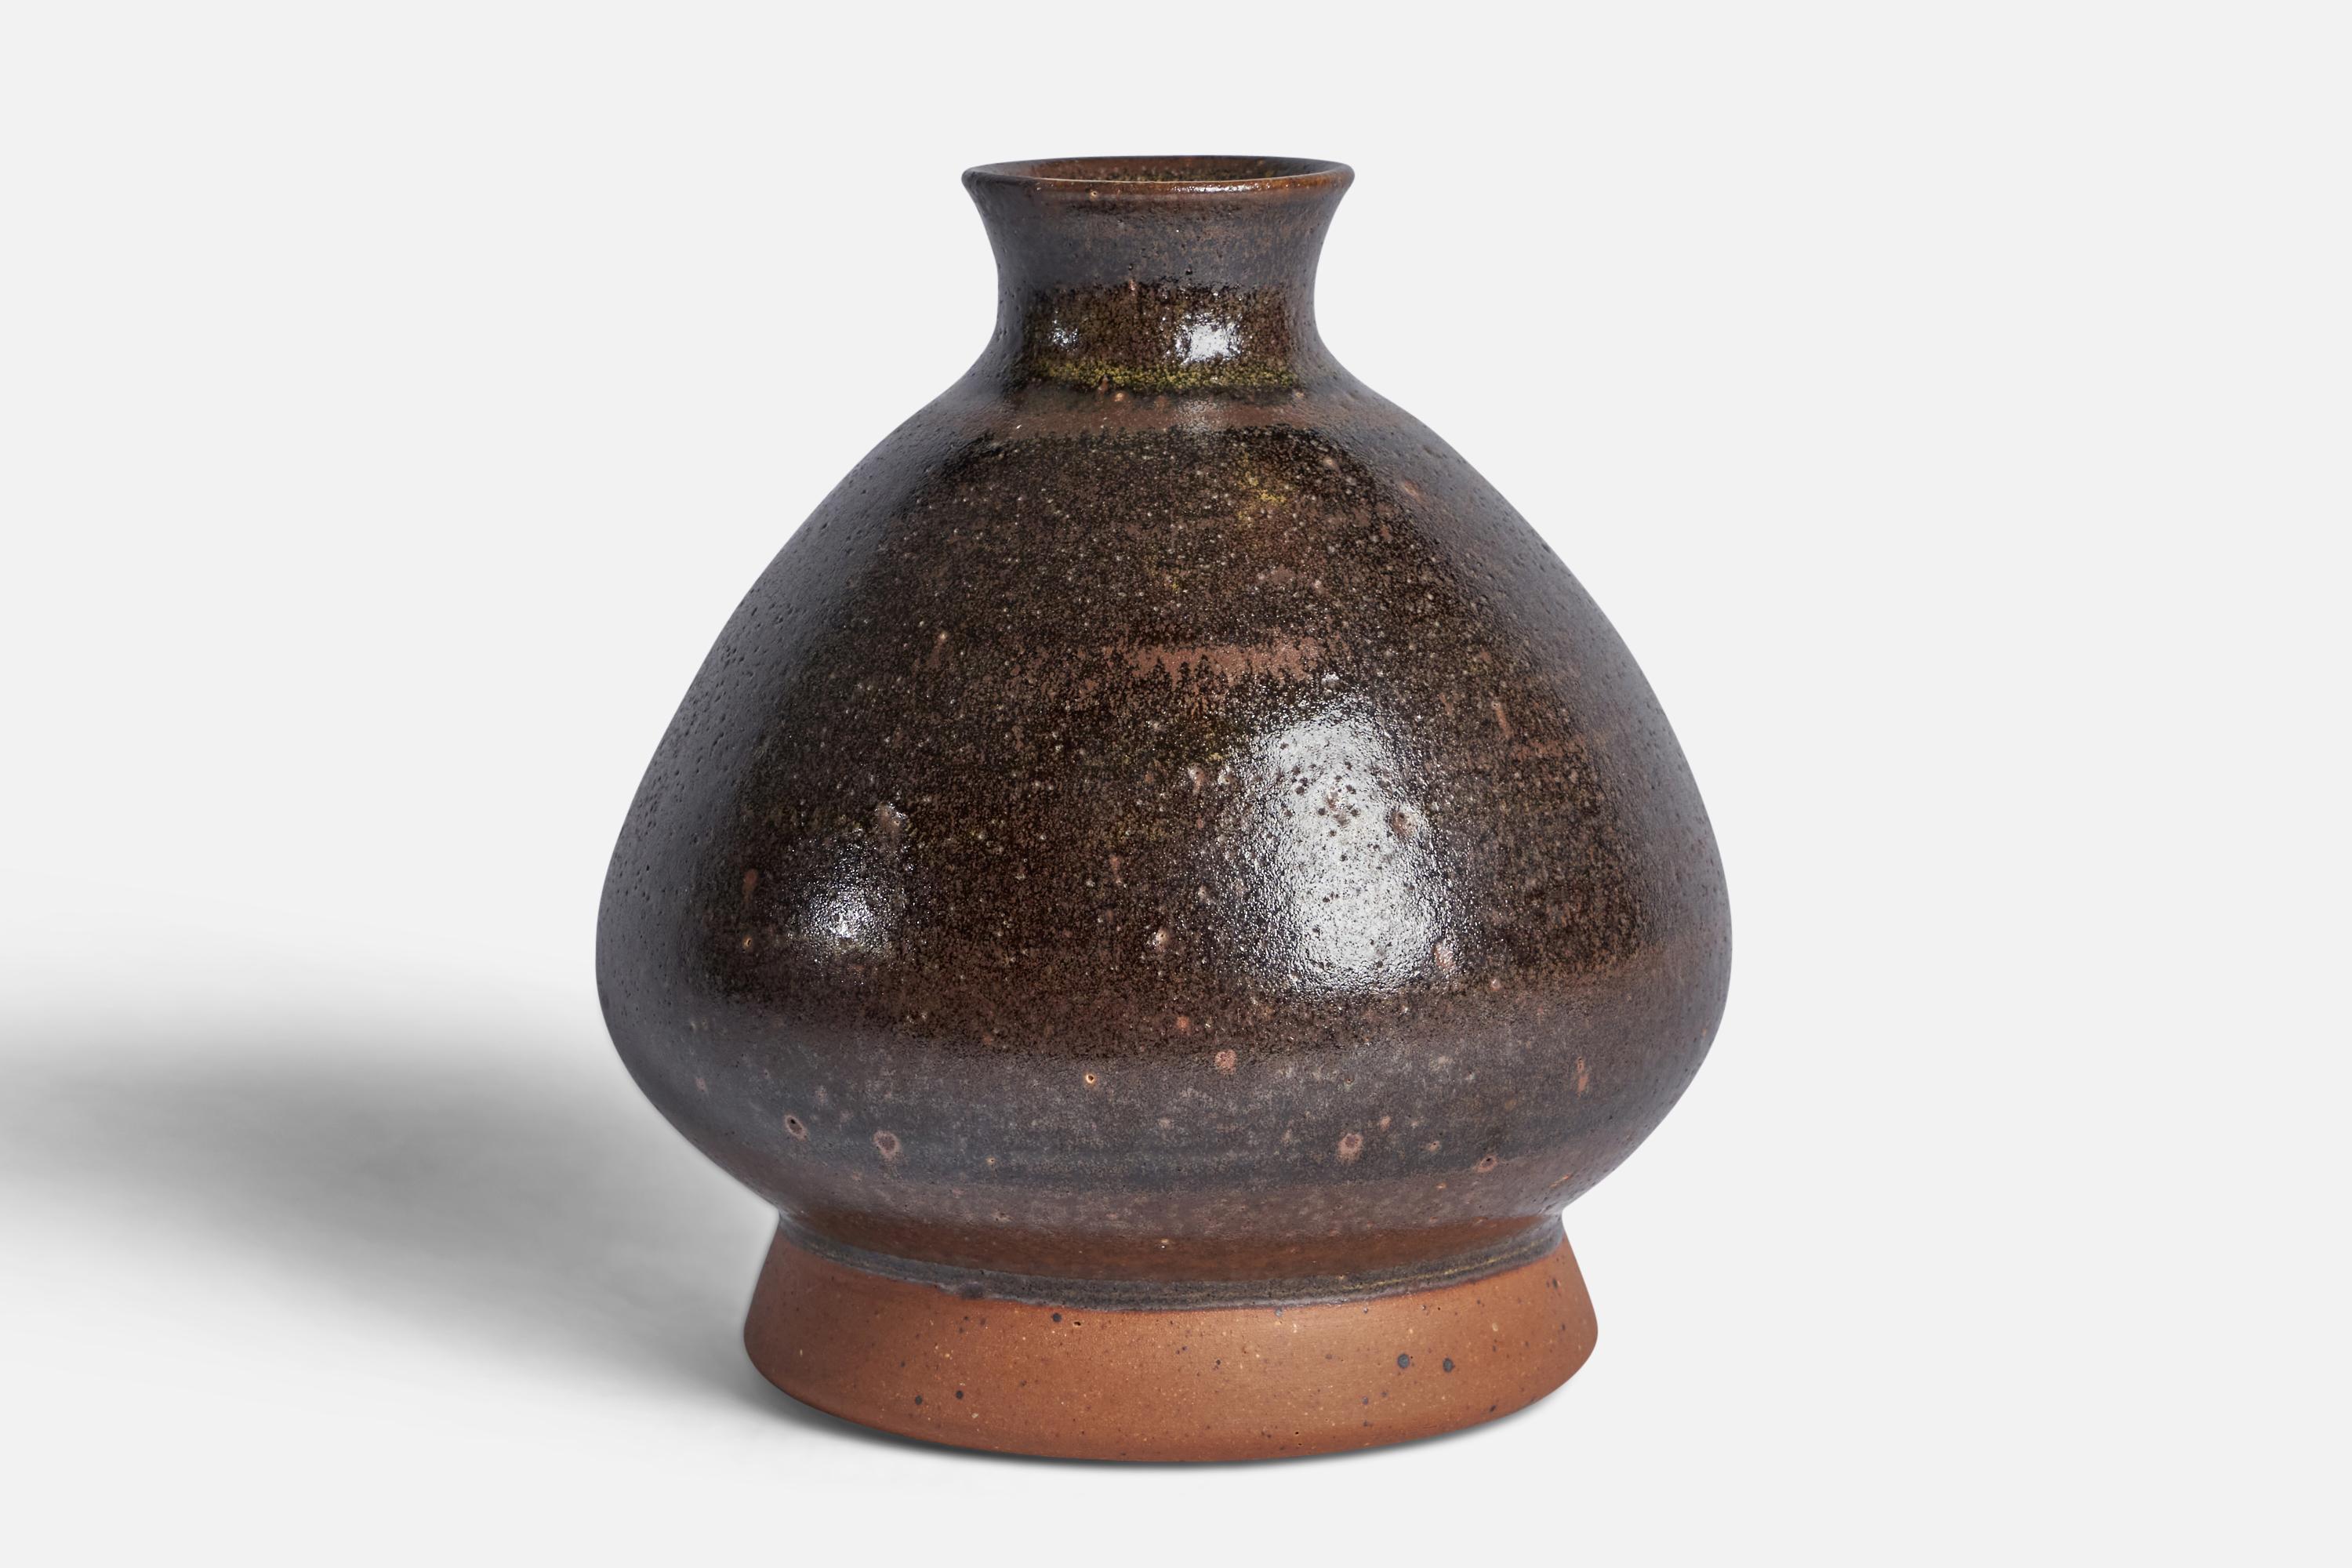 A brown semi-glazed stoneware vase designed and produced by John Andersson, Höganäs, Sweden, c. 1950s.